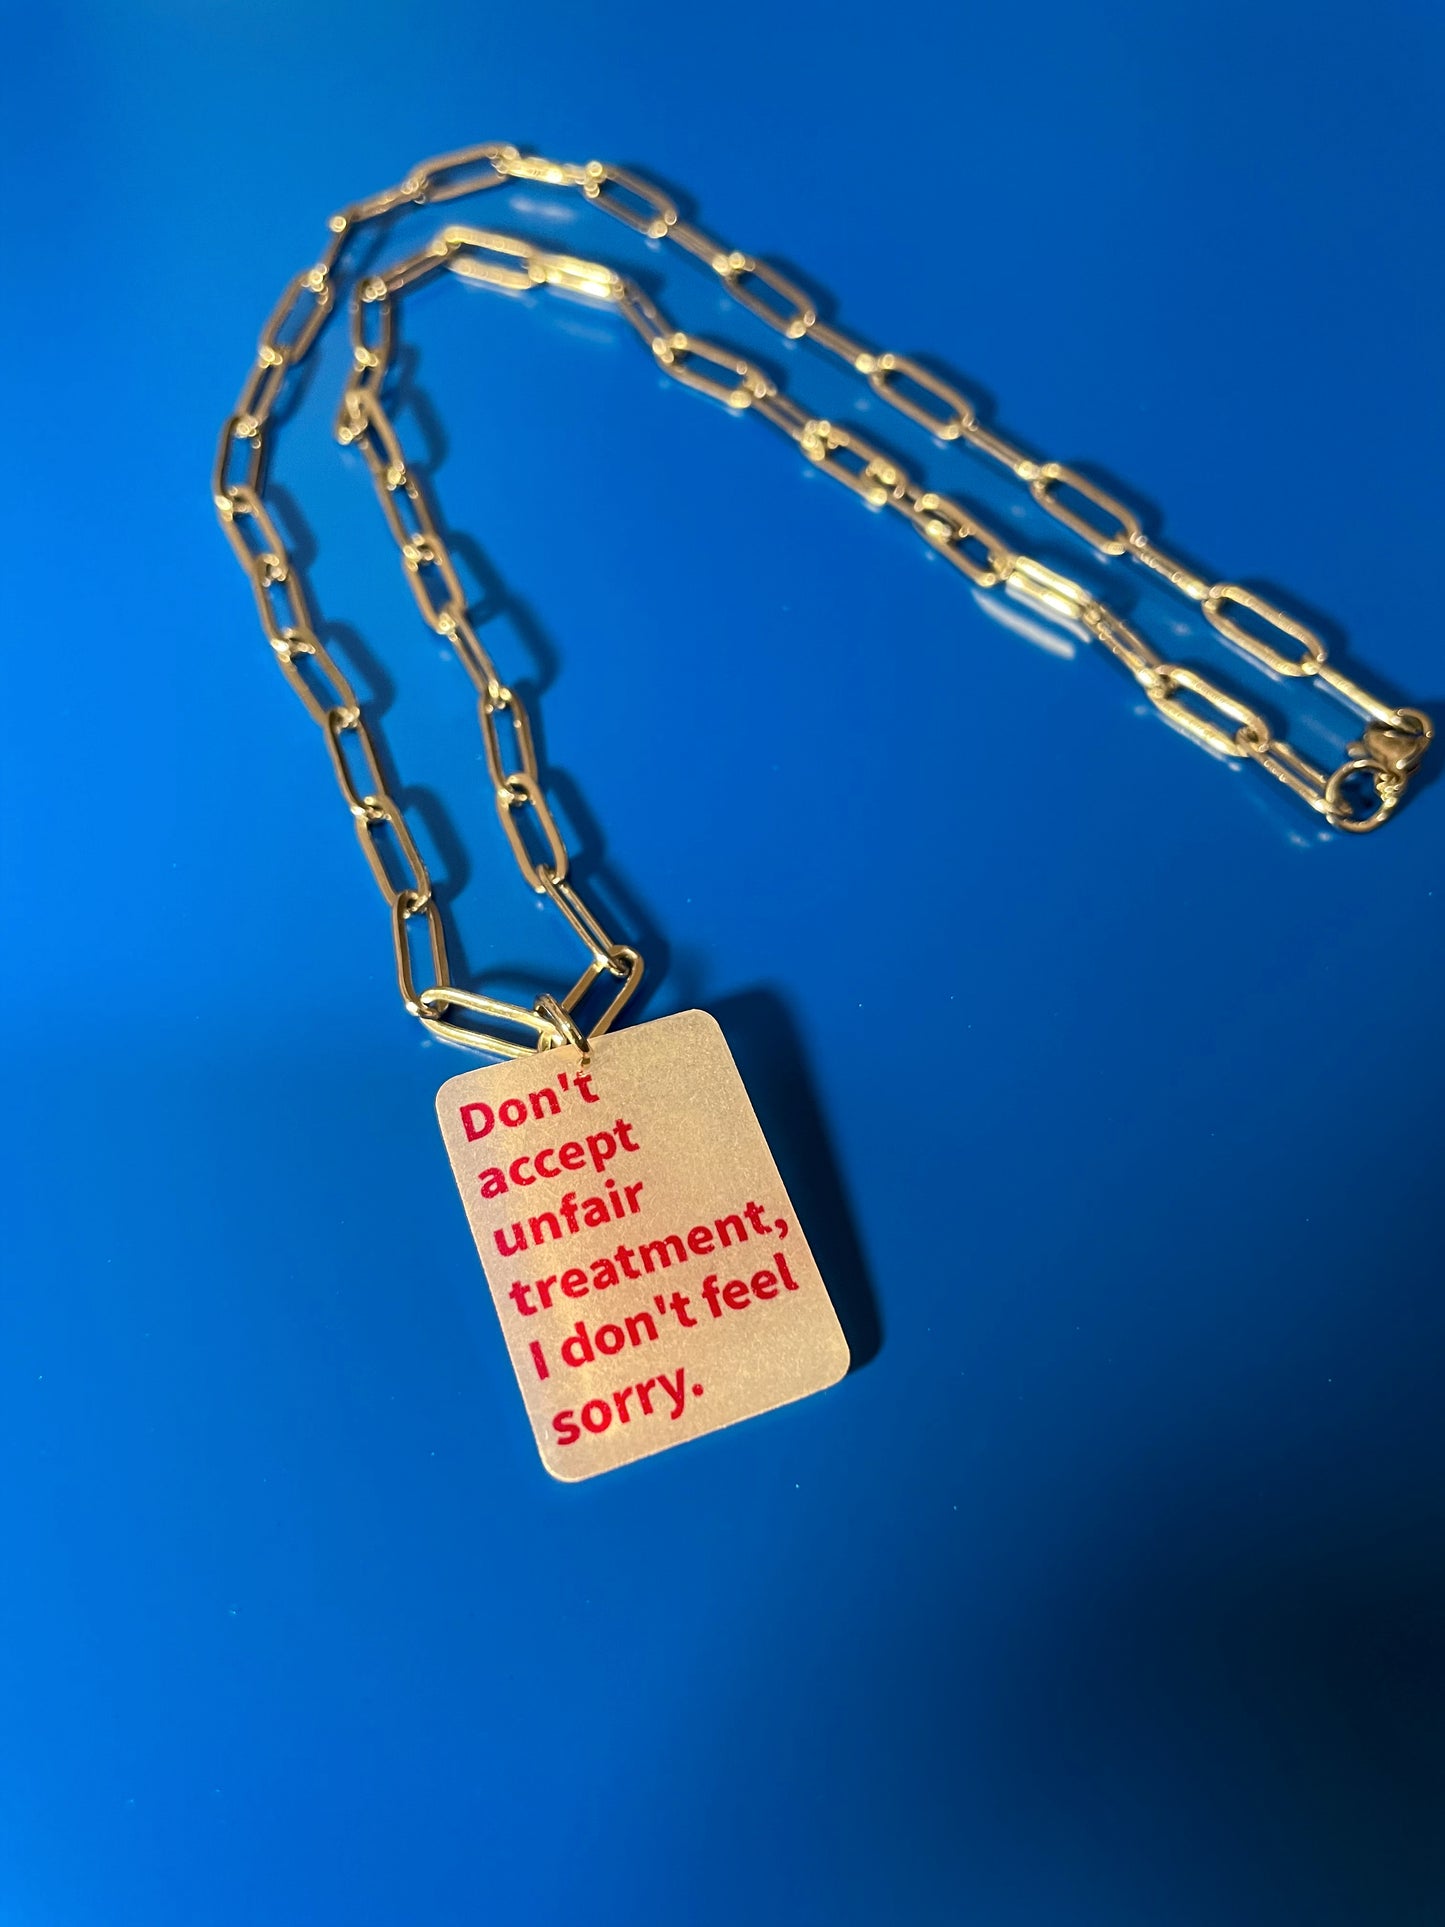 Only Women Understand -【I Don't Feel Sorry】 Series Pendant - Original Handcrafted